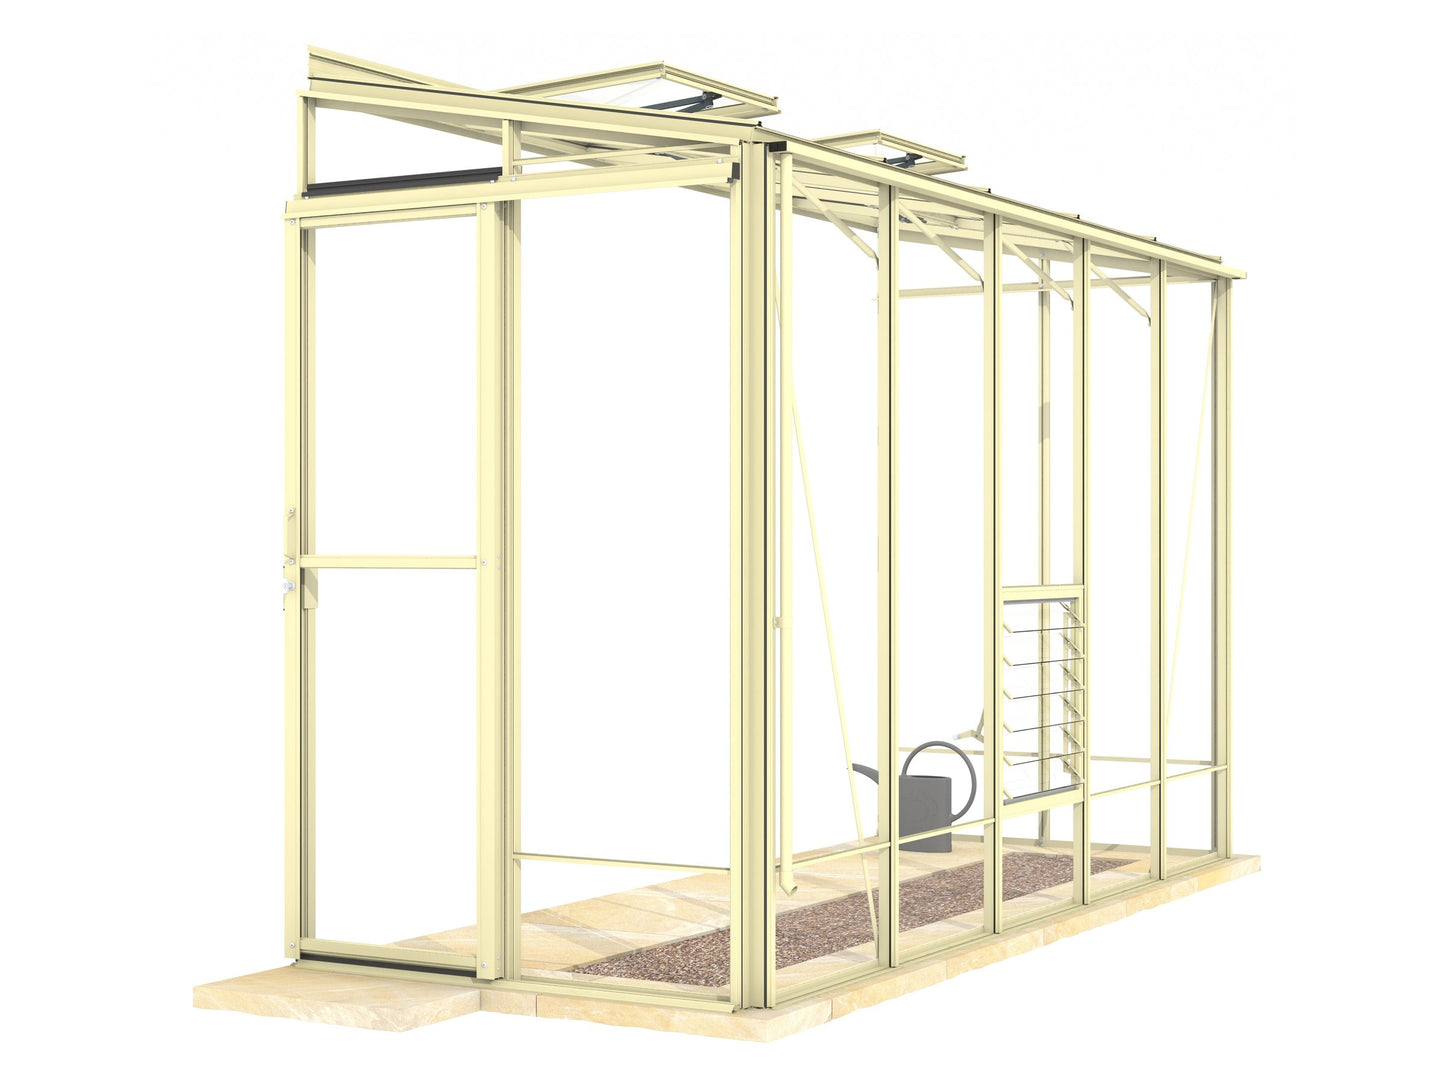 Robinsons 4ft wide LEAN-TO